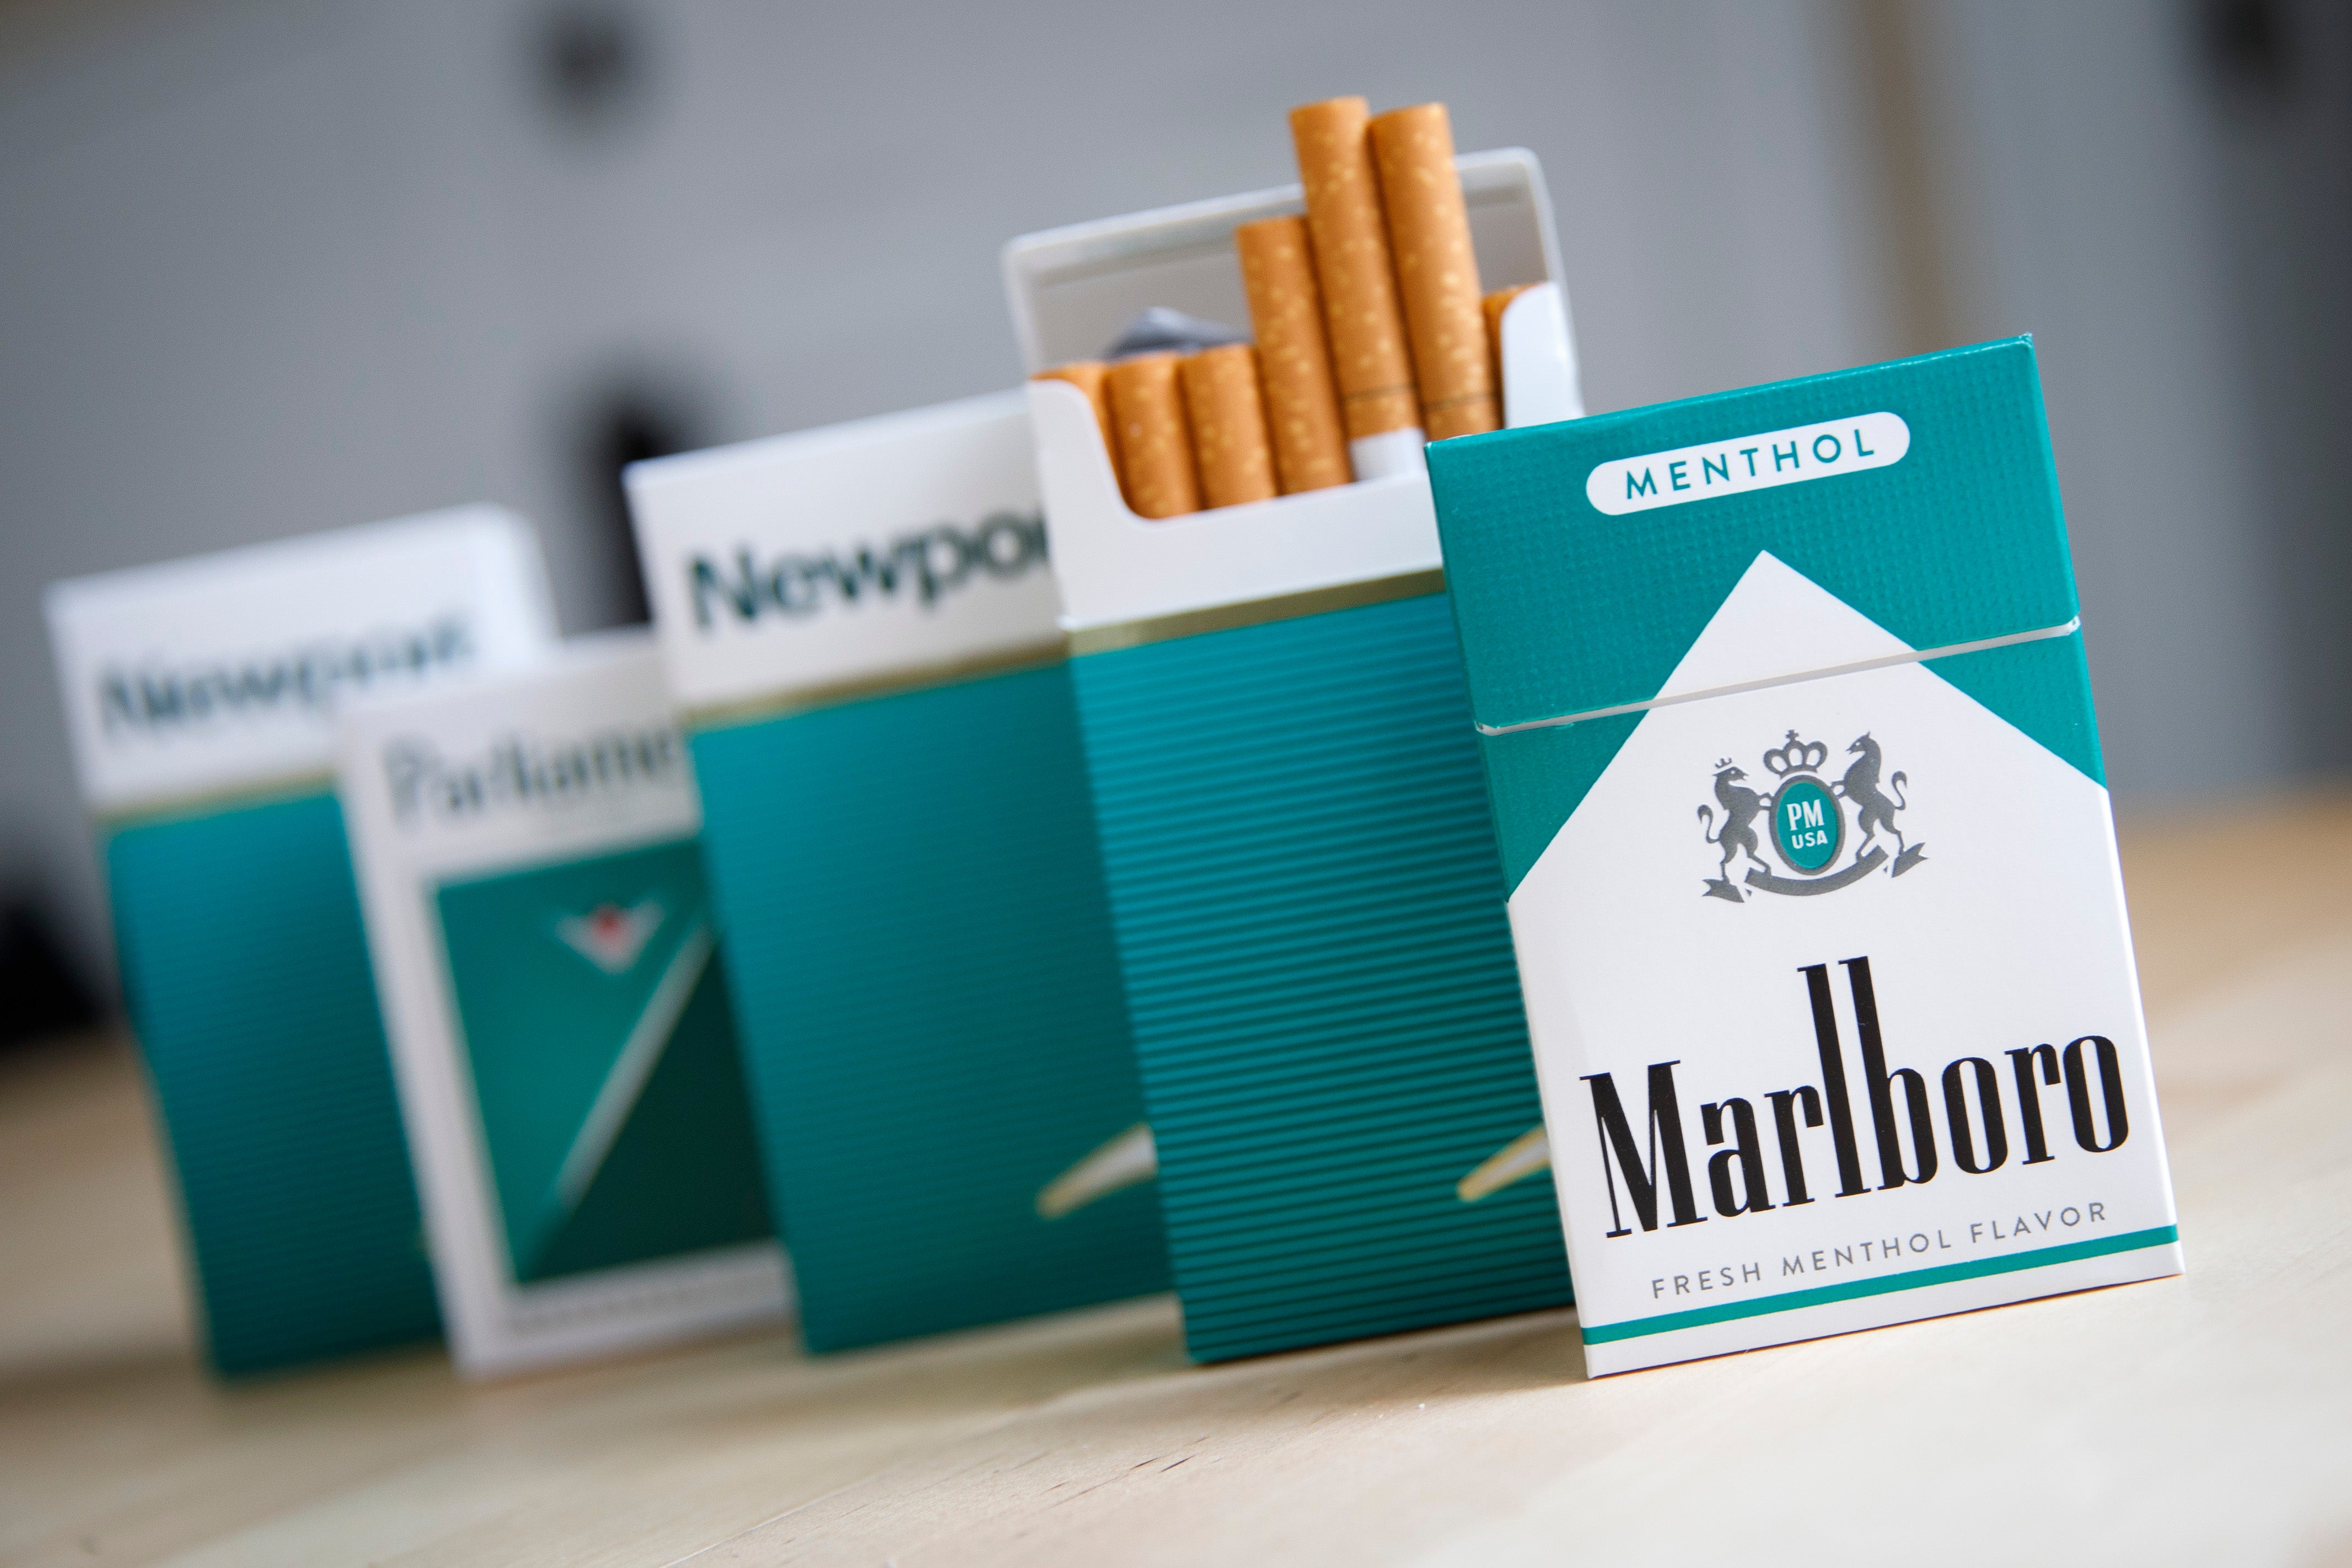 US poised to ban menthol cigarettes